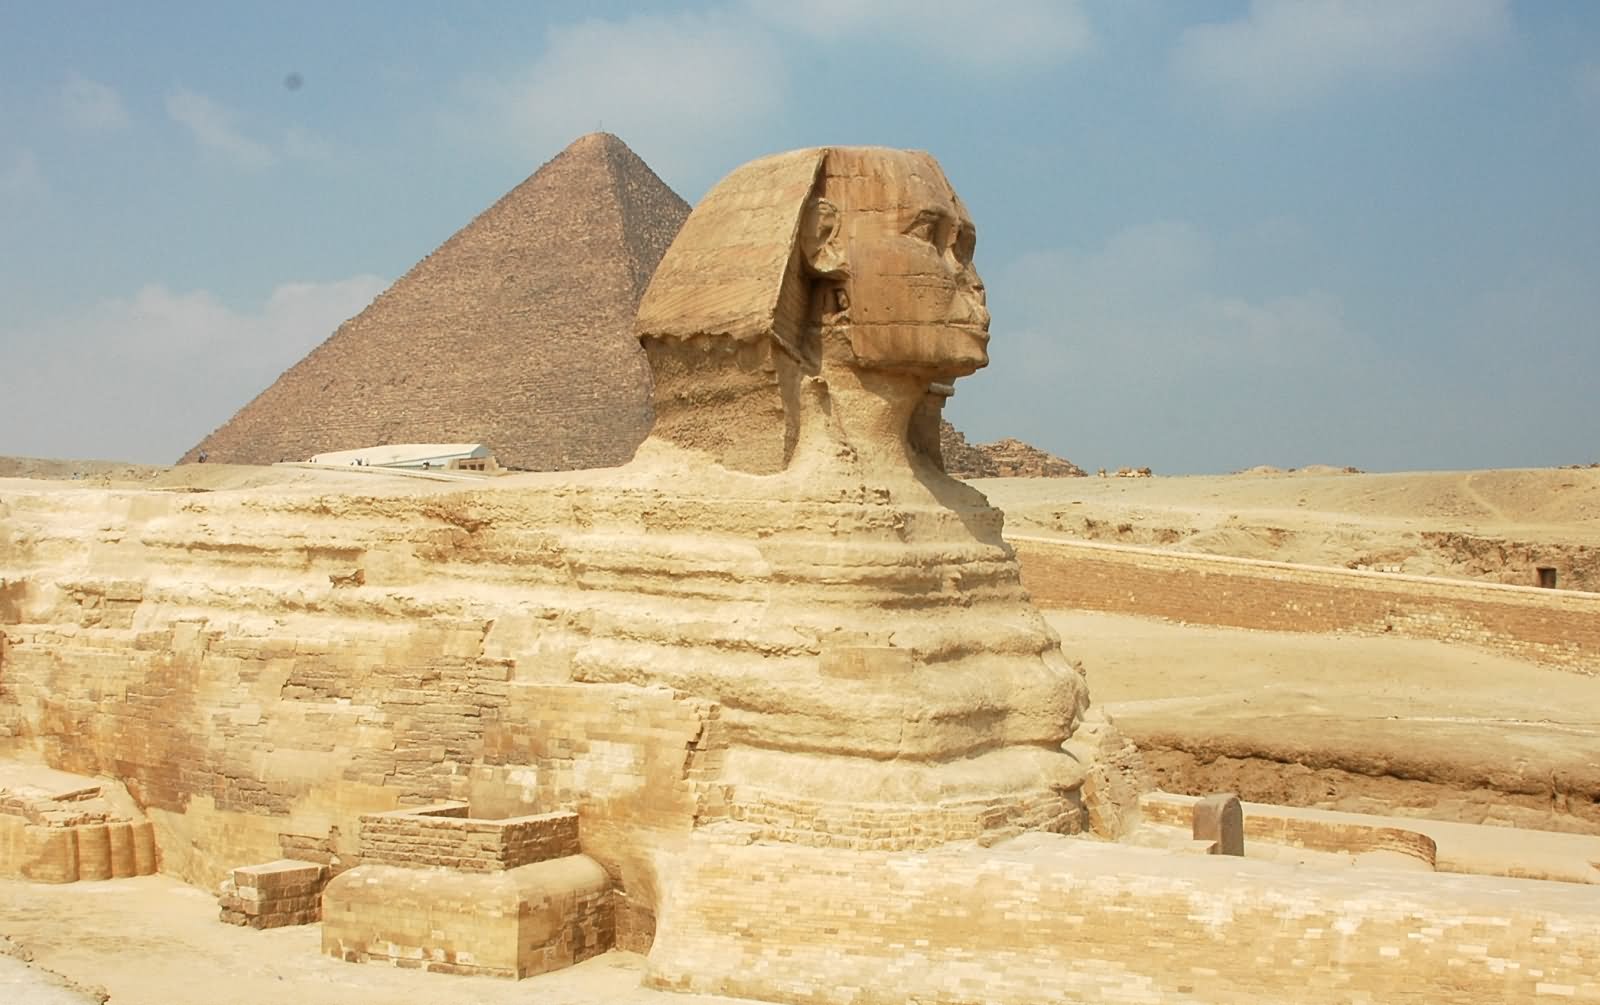 The View Of Great Sphinx of Giza And Pyramid Of Khufu